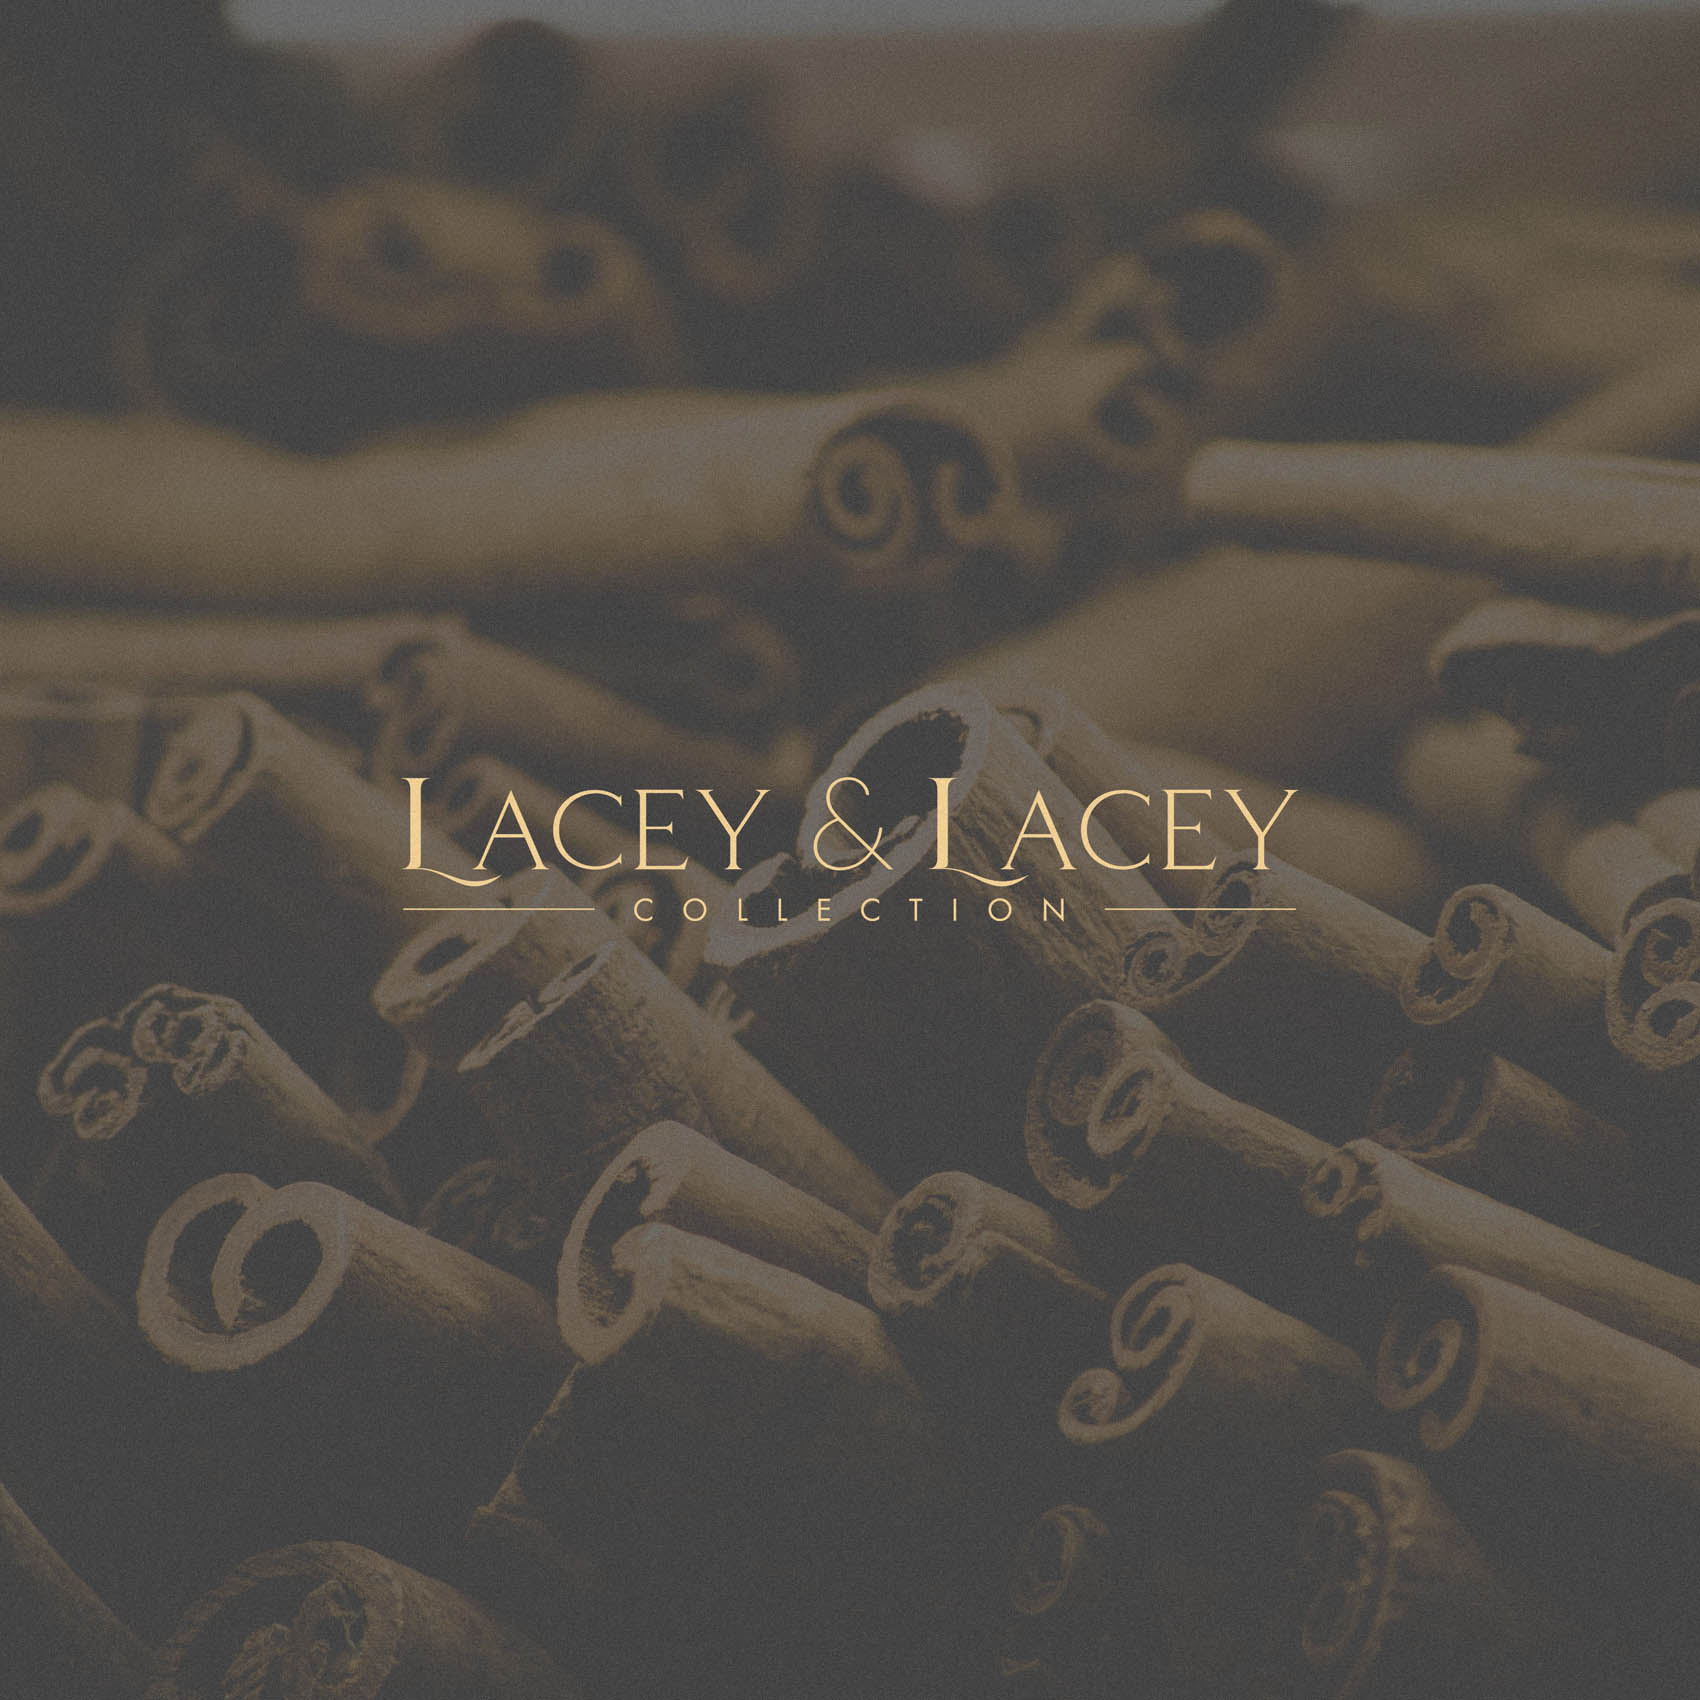 Lacey & Lacey - Luxury Candle Packaging Logo & Brand Identity3